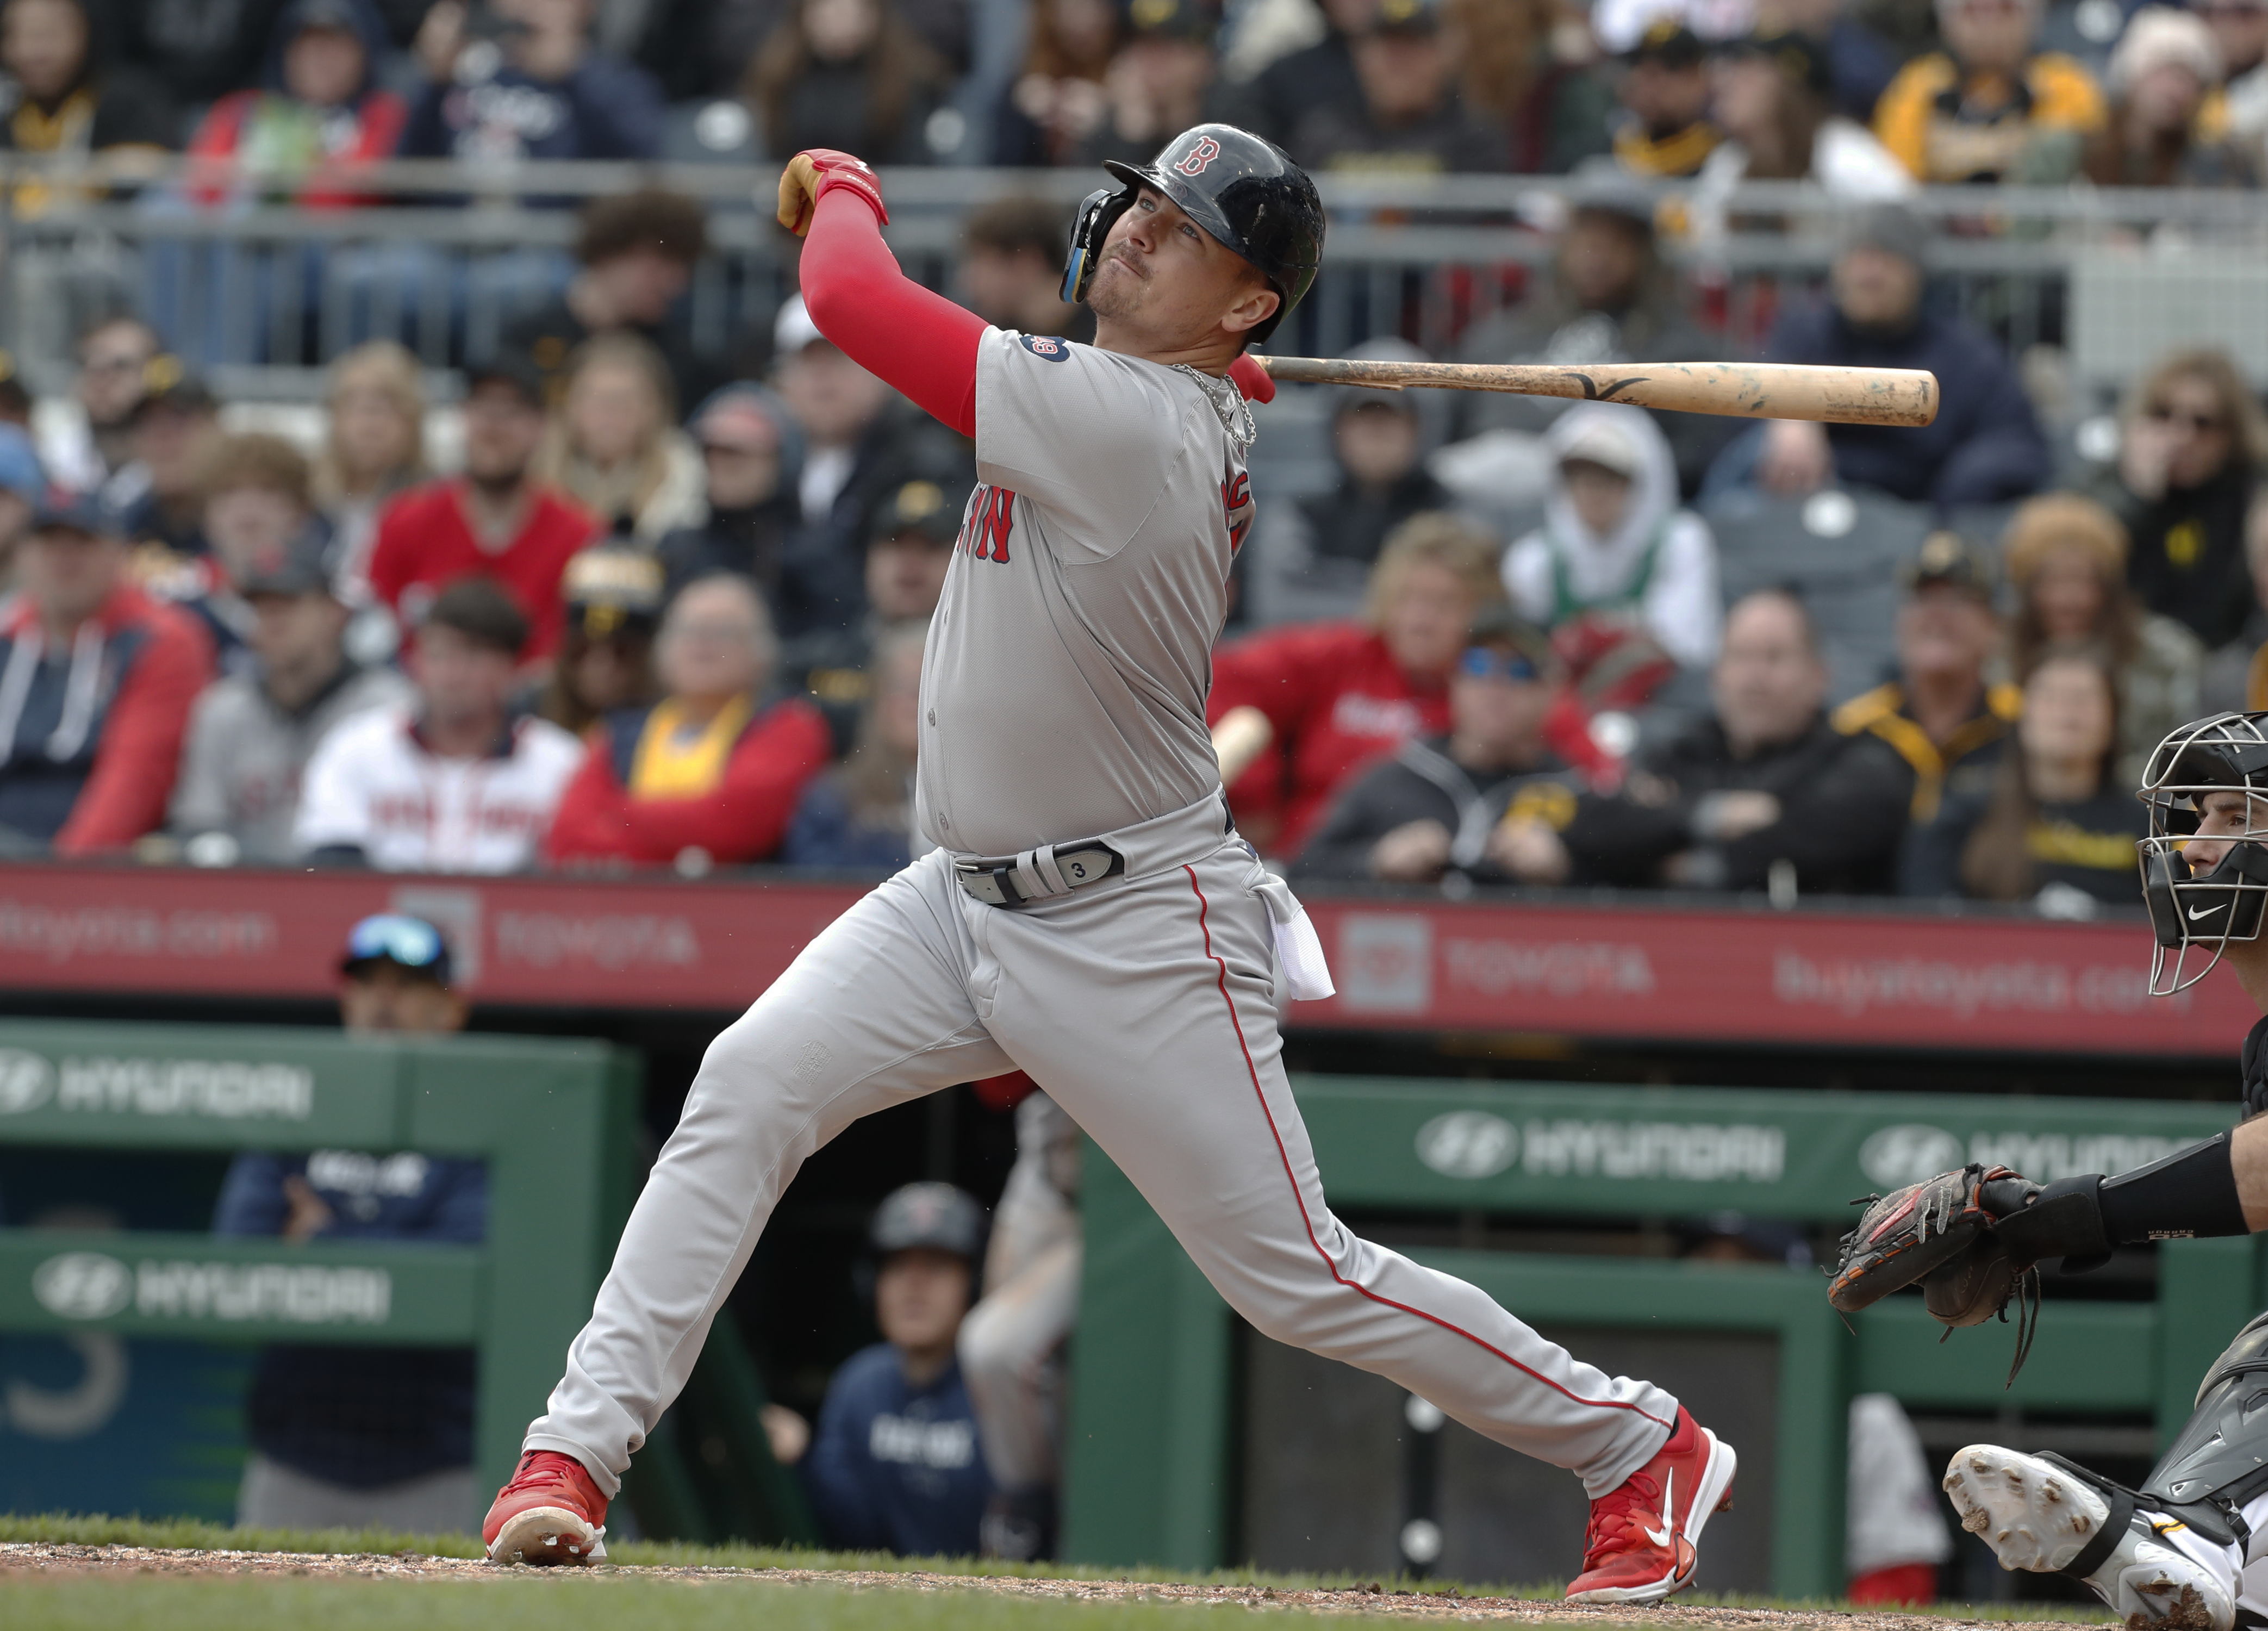 Reese McGuire chats with Joe & Will following the Red Sox sweep over the Pirates